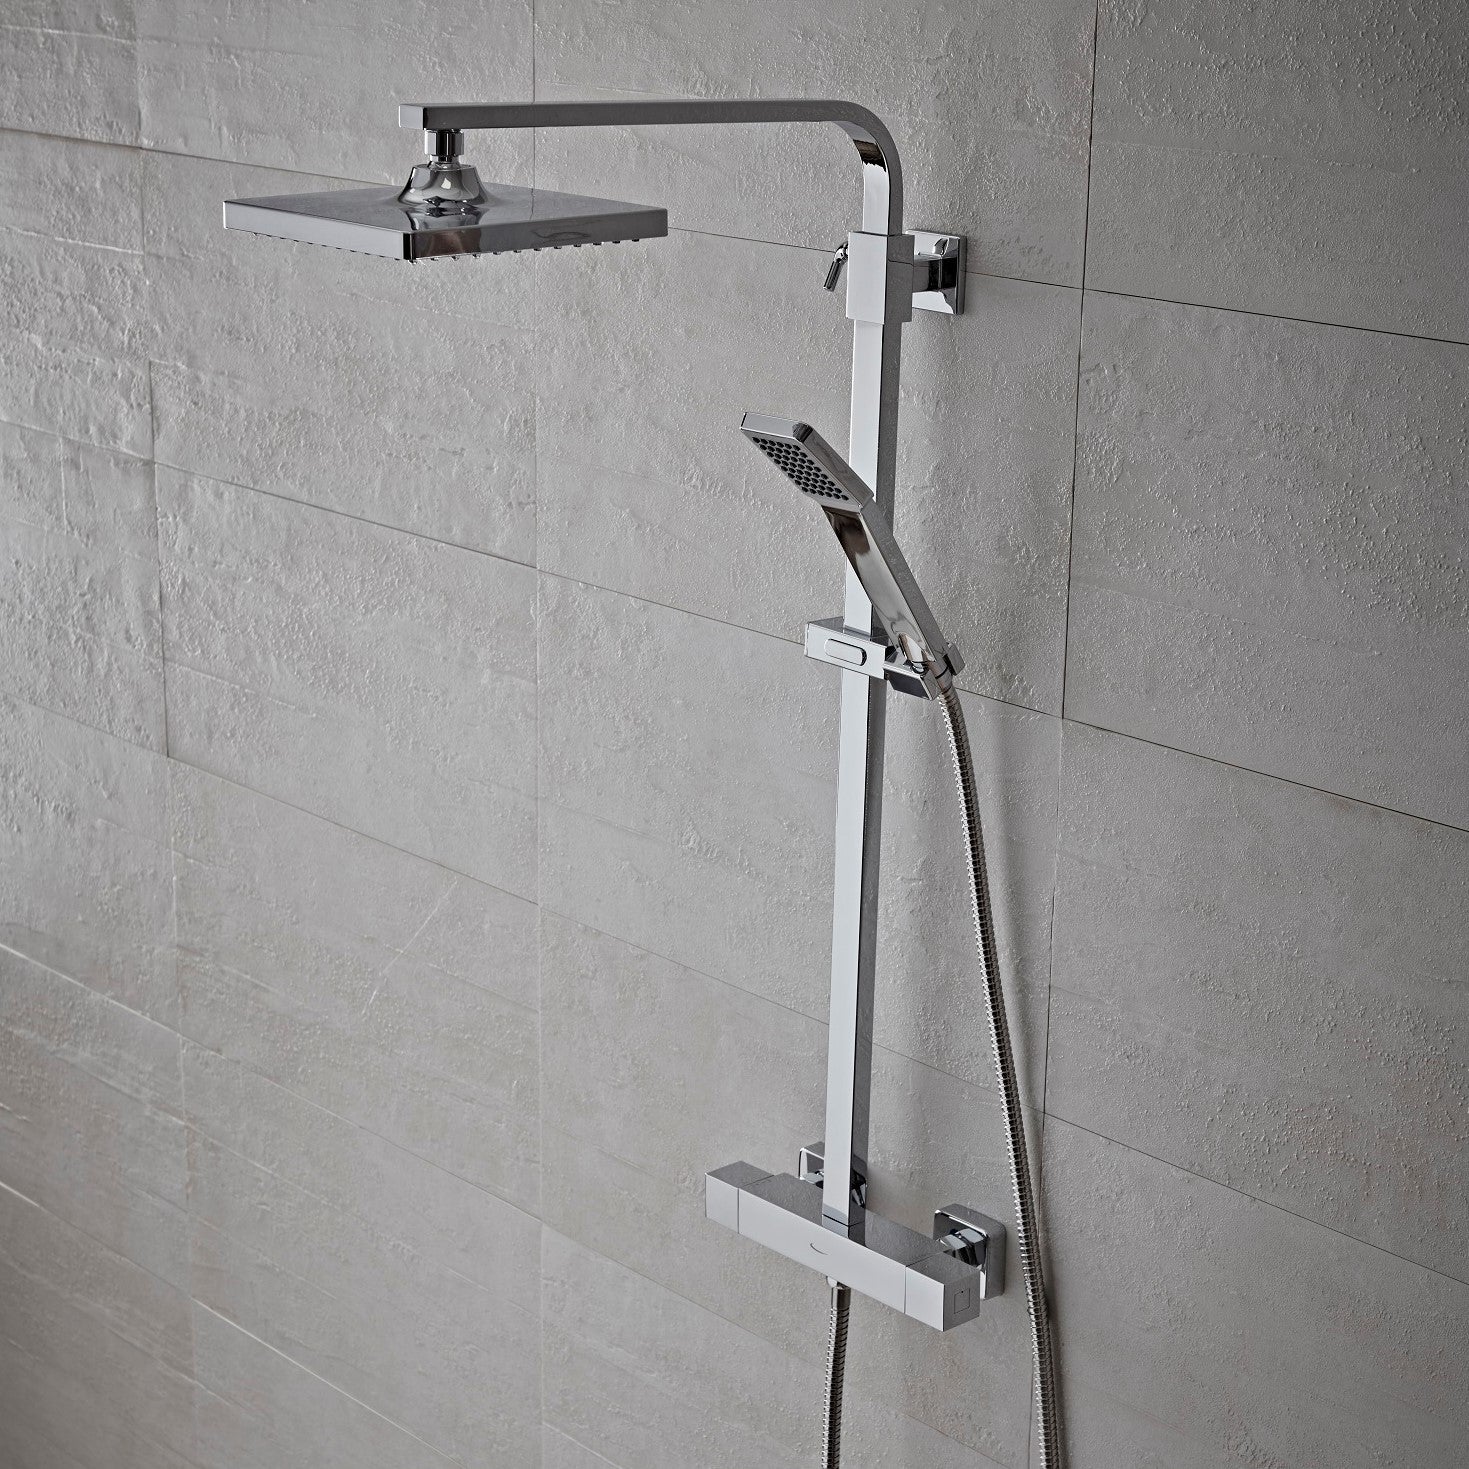 Tavistock Zone Square Exposed Bar Shower System with Fixed Head and Handset against grey tiling showing the full shower body SZN1508